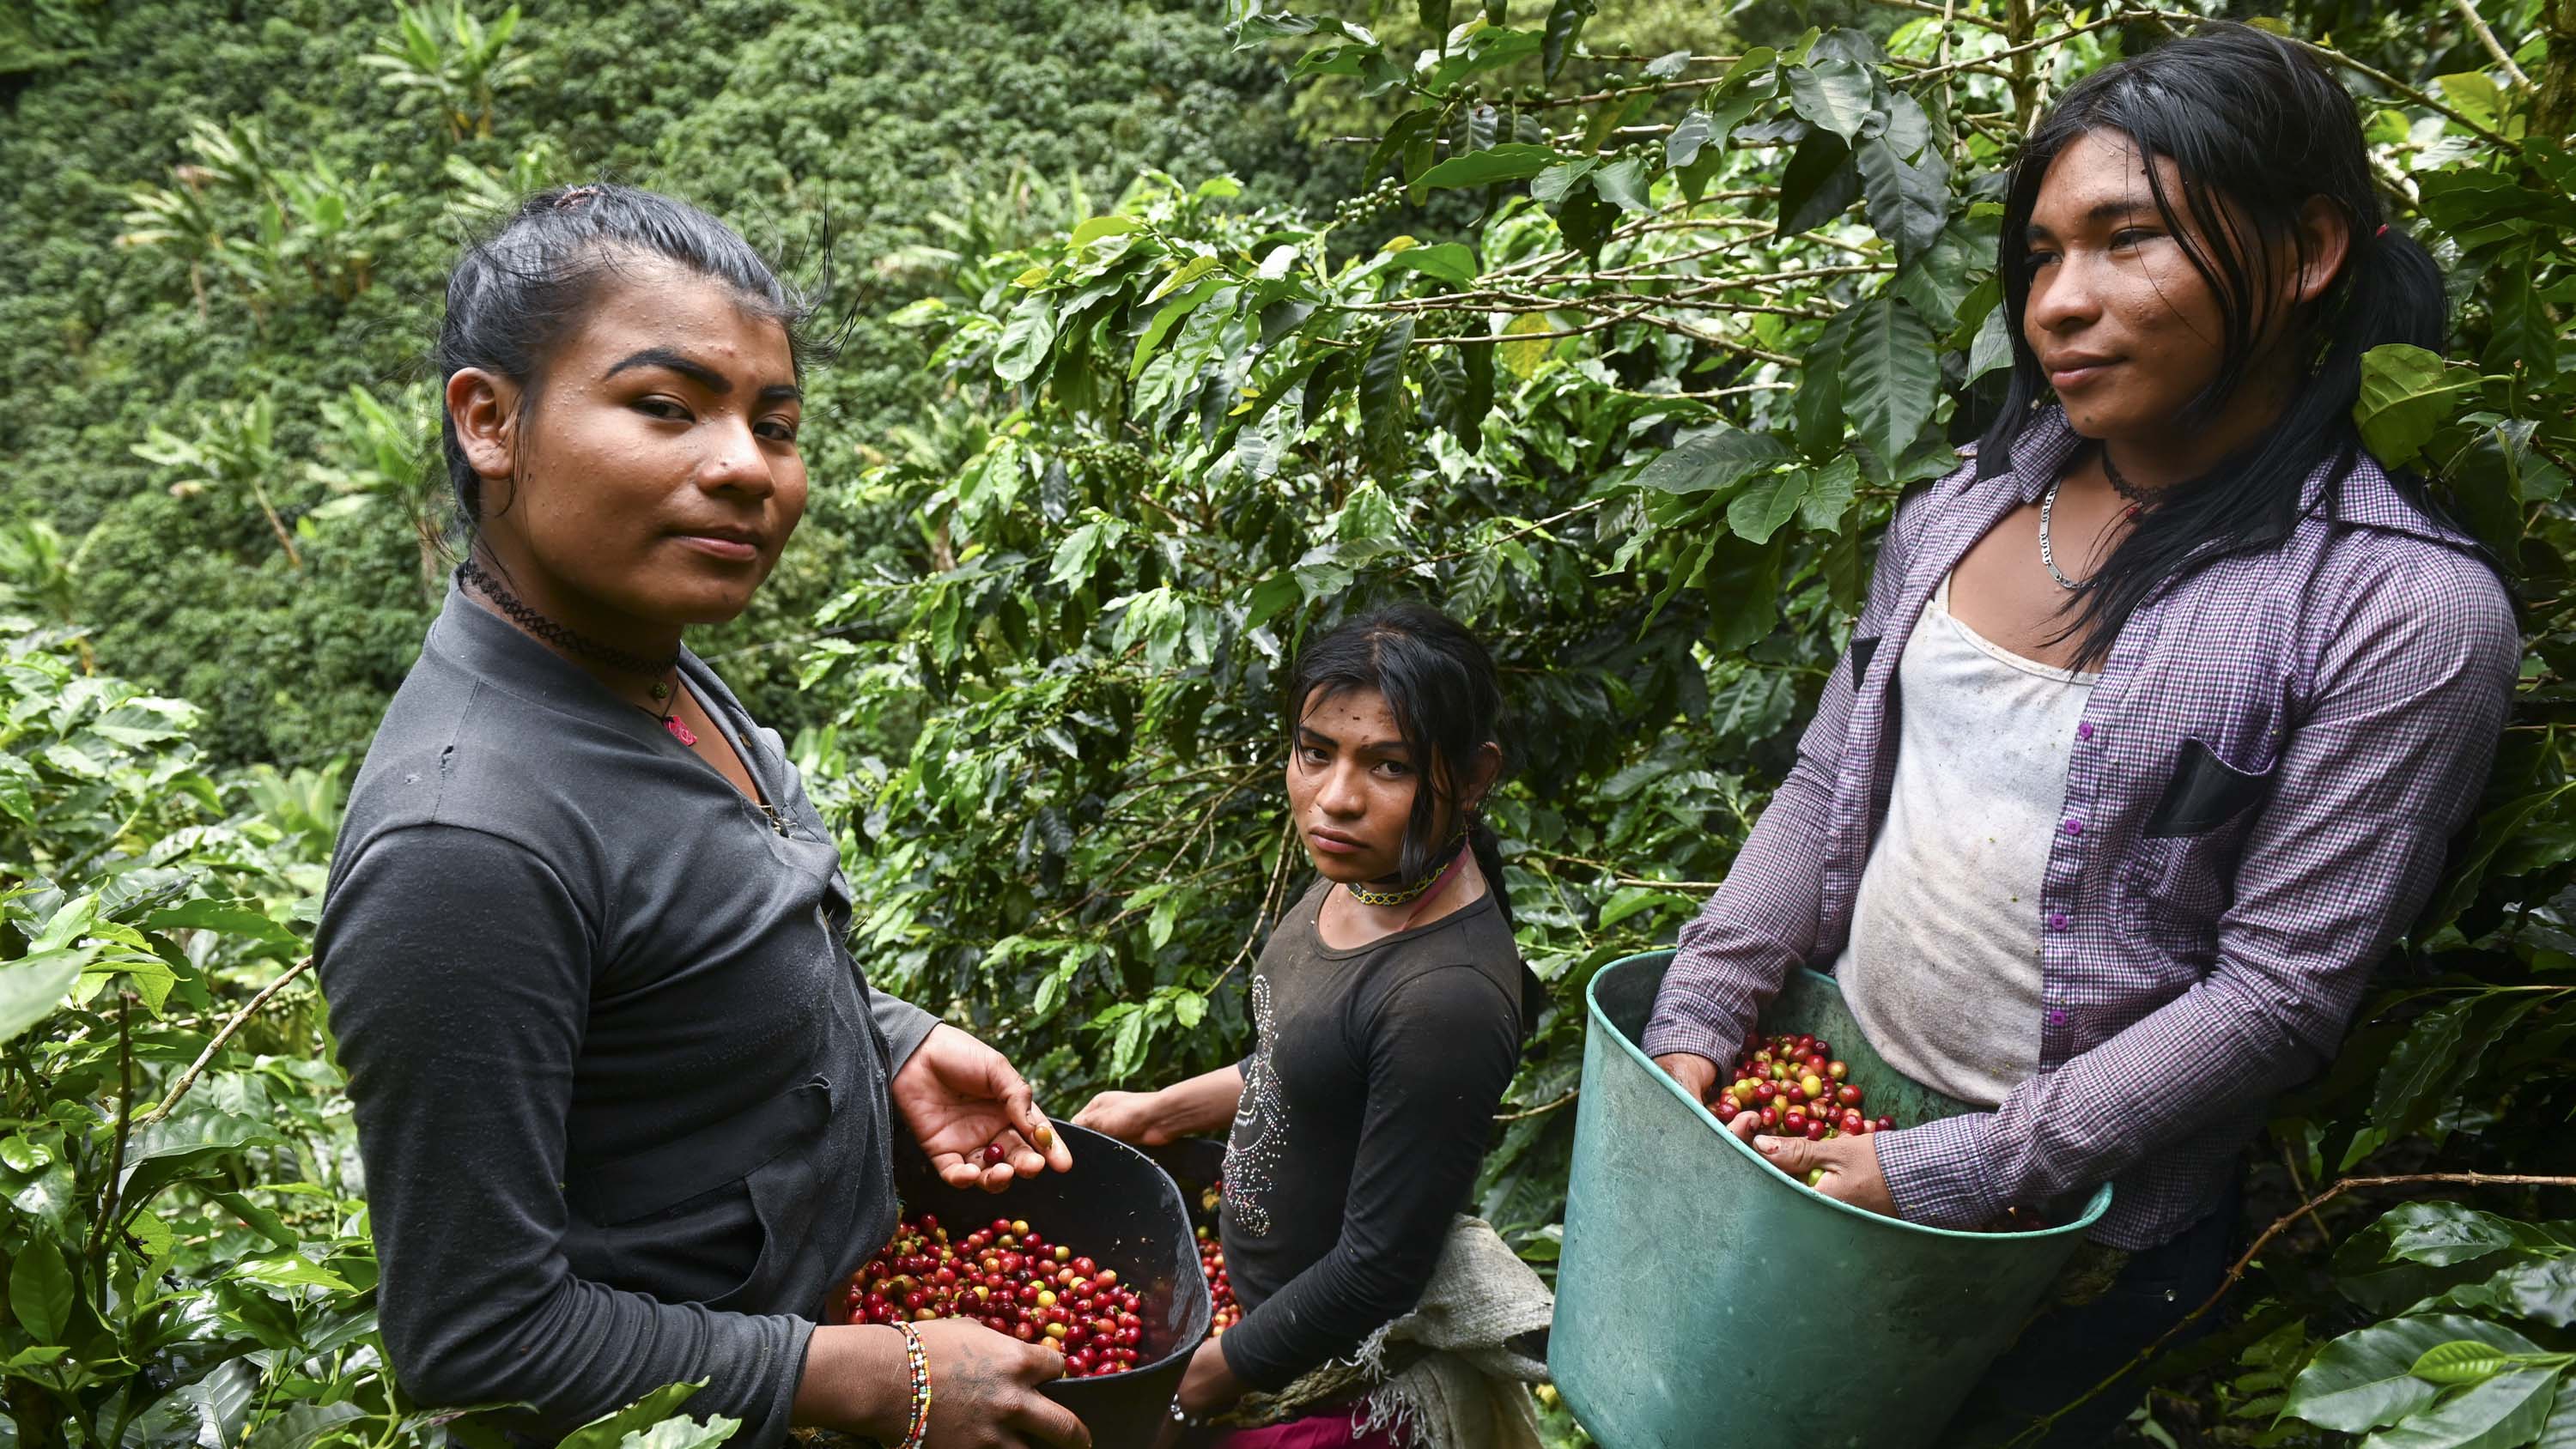 Transgender womens of the Embera Chami indigenous community, Veronica (L), Andrea (C) and Erika, pose while collecting coffee at a farm in Santuario, Risaralda department, Colombia on May 10, 2019. - Transgender indigenous people expelled from their community, work at coffee farms in a conservative town in center-west Colombia. (Photo by Raul ARBOLEDA / AFP)